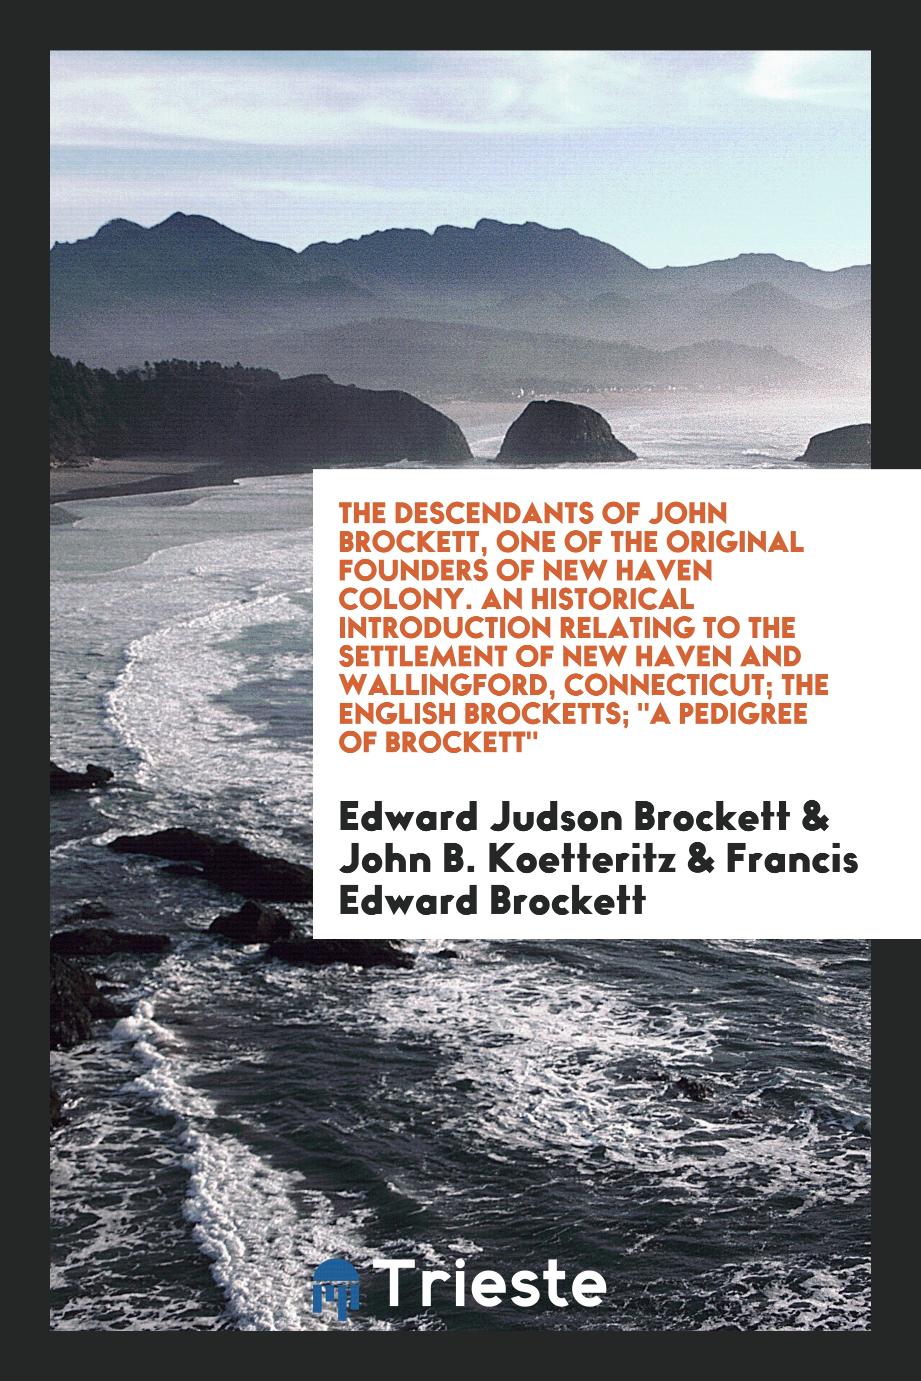 The Descendants of John Brockett, One of the Original Founders of New Haven Colony. An Historical Introduction Relating to the Settlement of New Haven and Wallingford, Connecticut; The English Brocketts; "A Pedigree of Brockett"